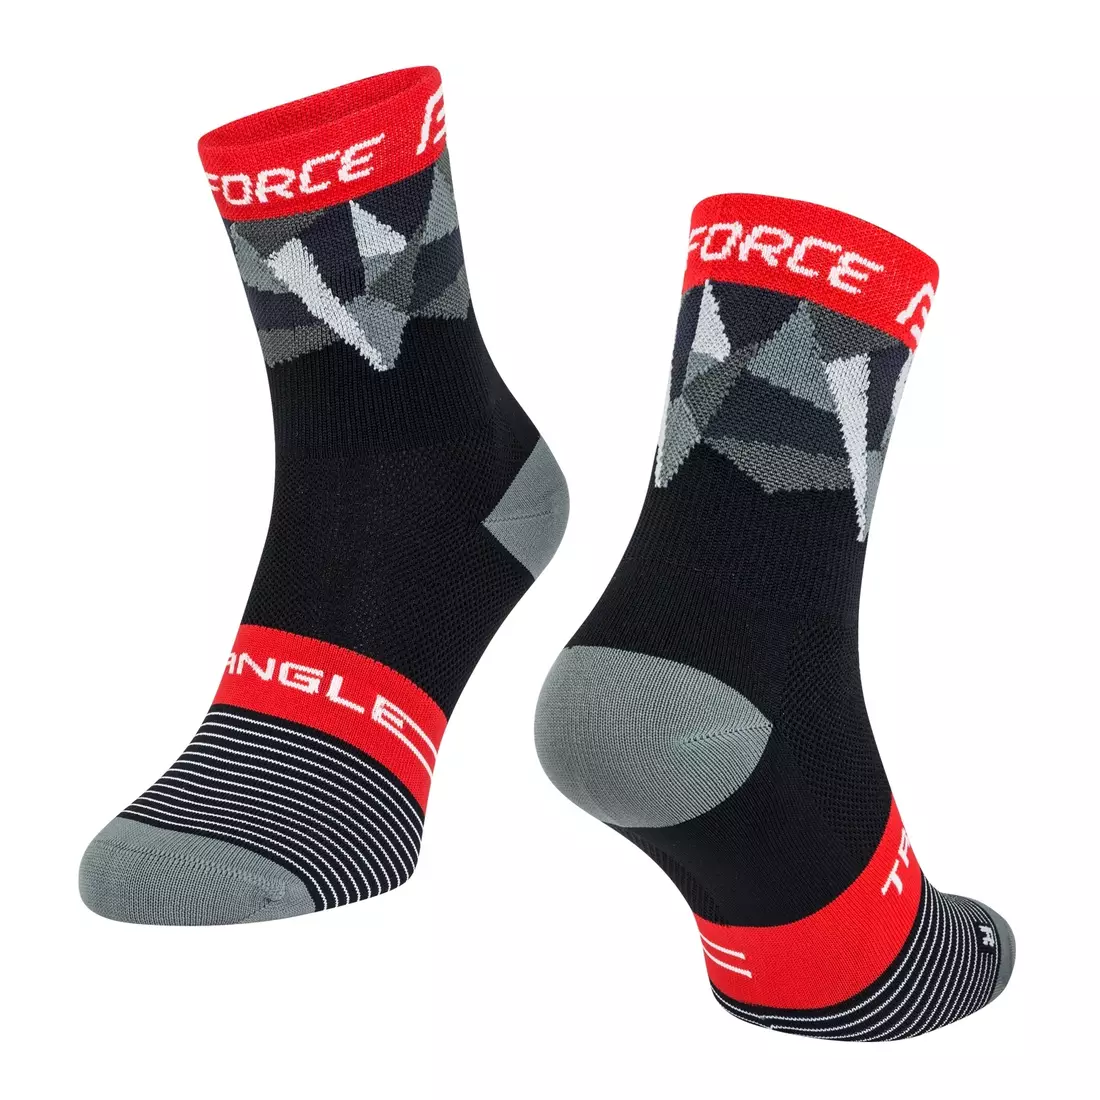 FORCE TRIANGLE cycling/sports socks, black and red